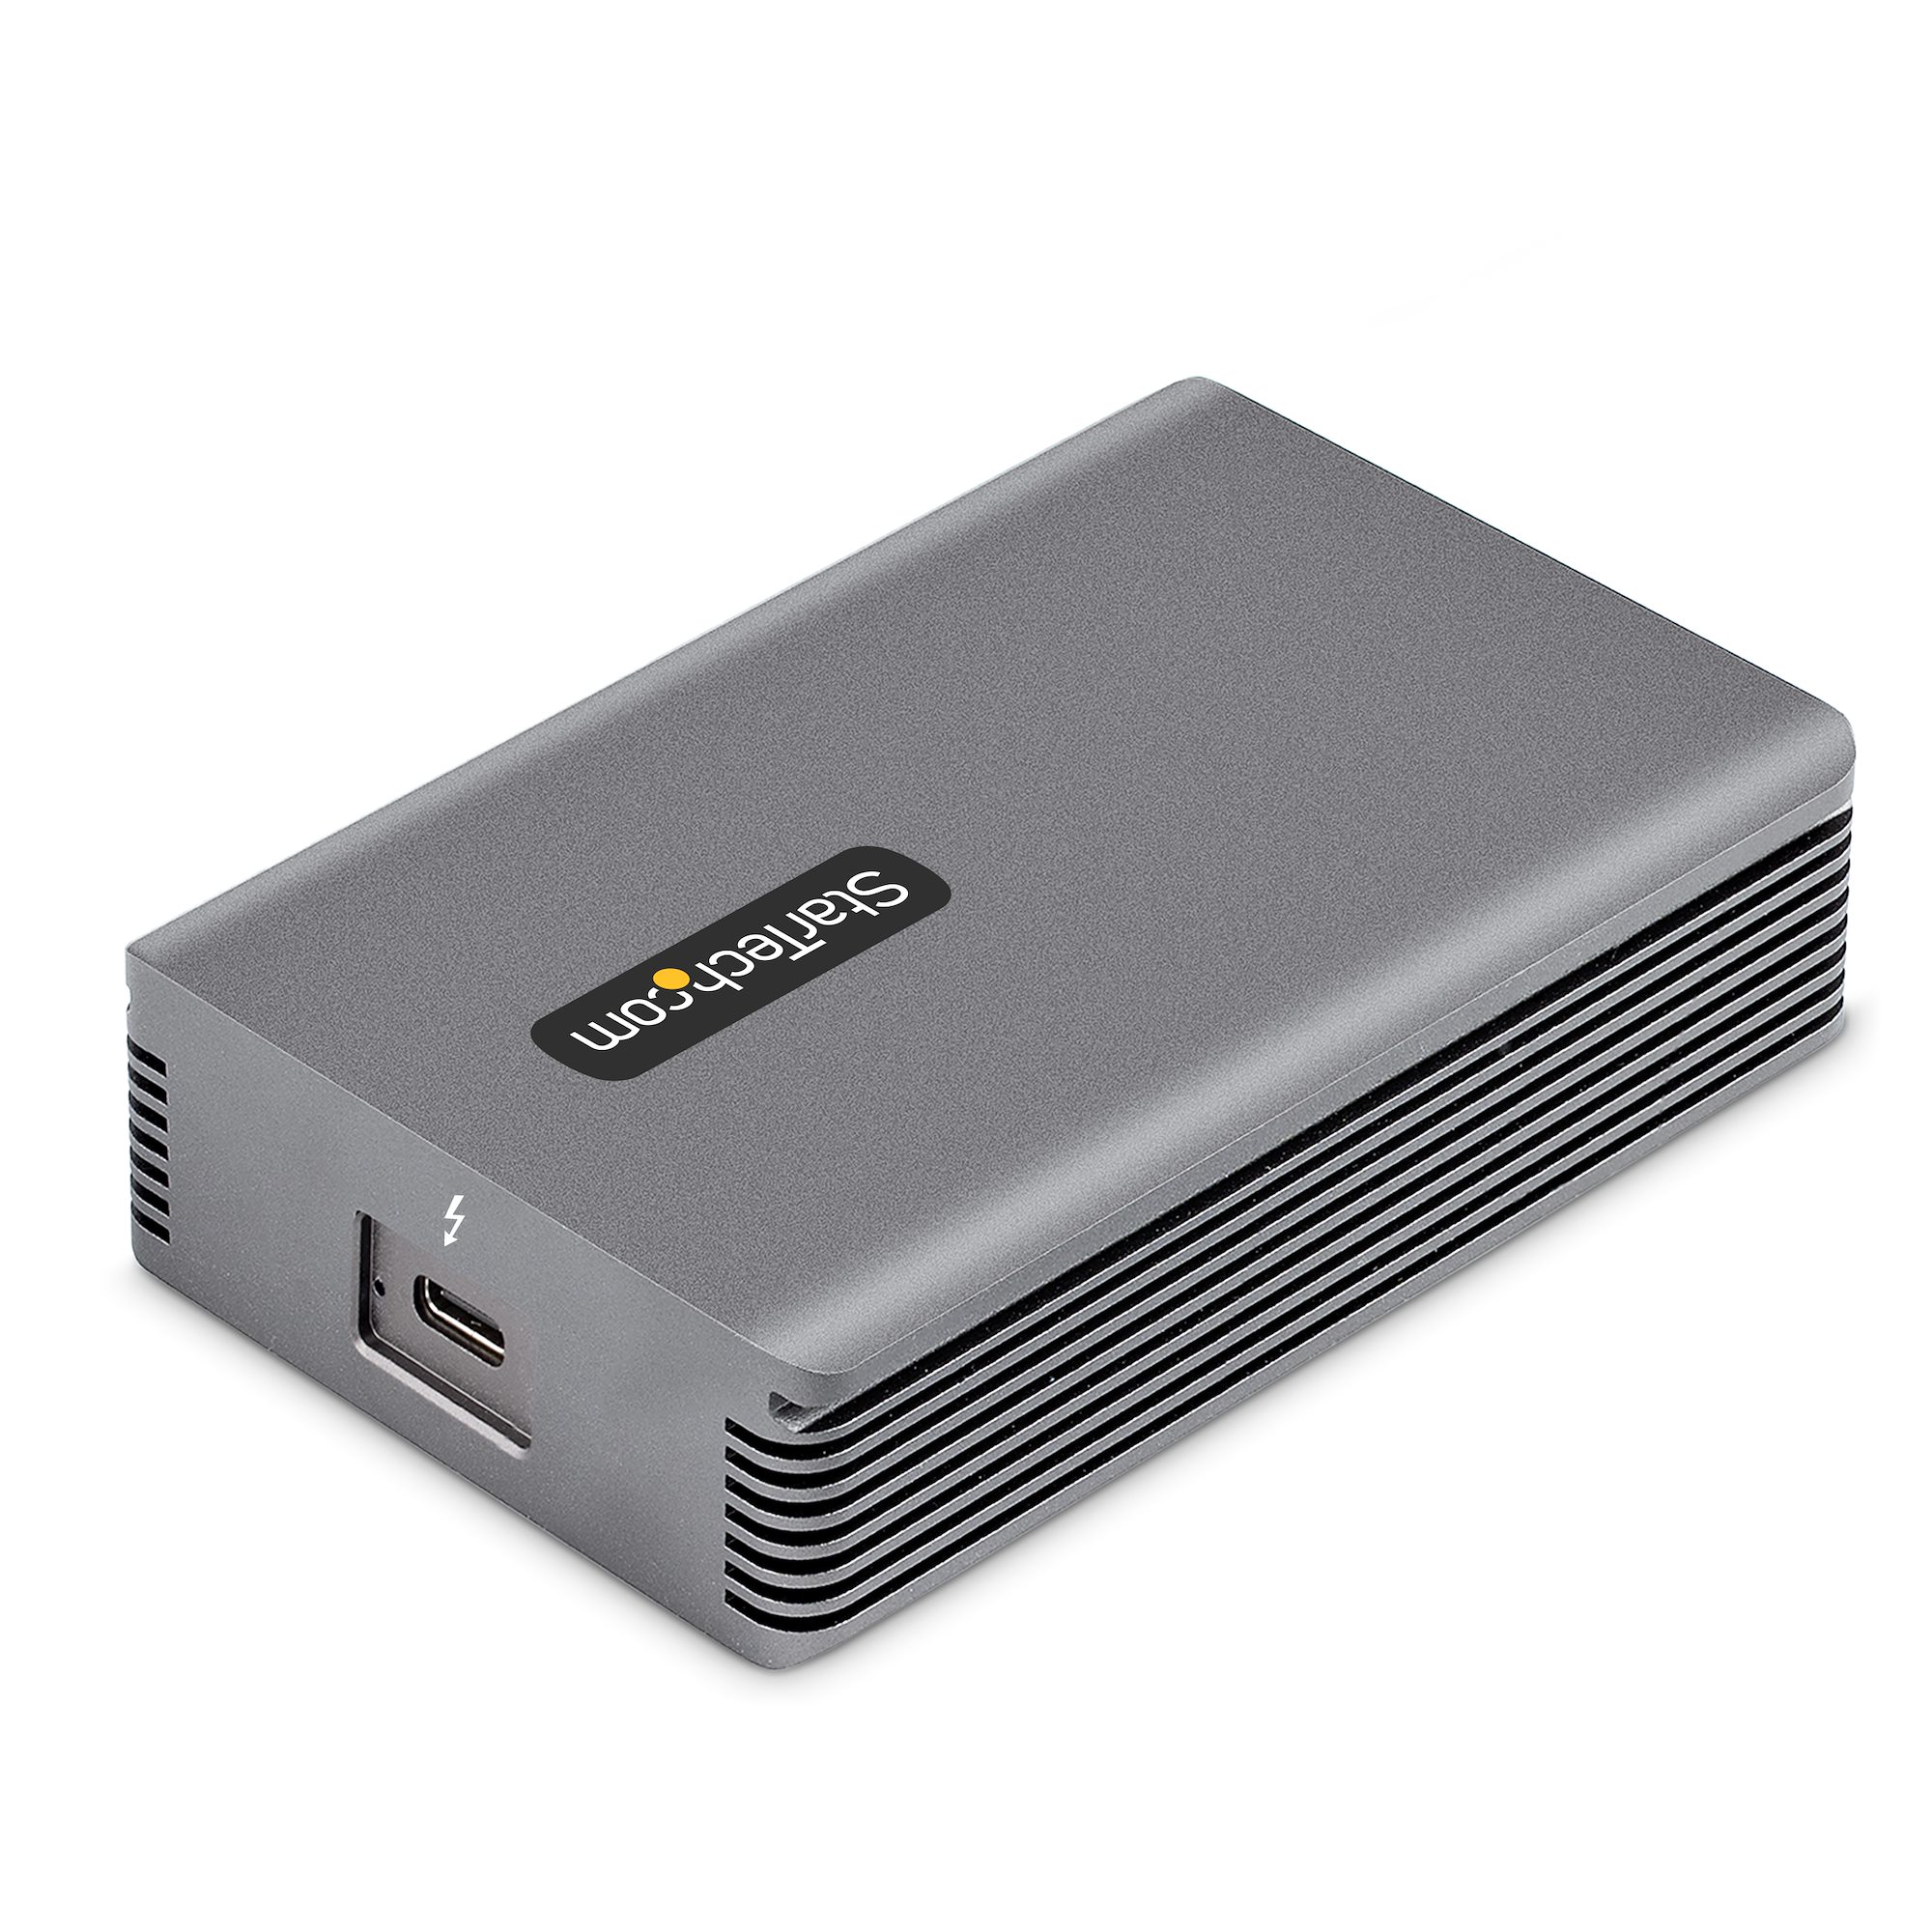 Thunderbolt3 to 10GbE LAN adapter